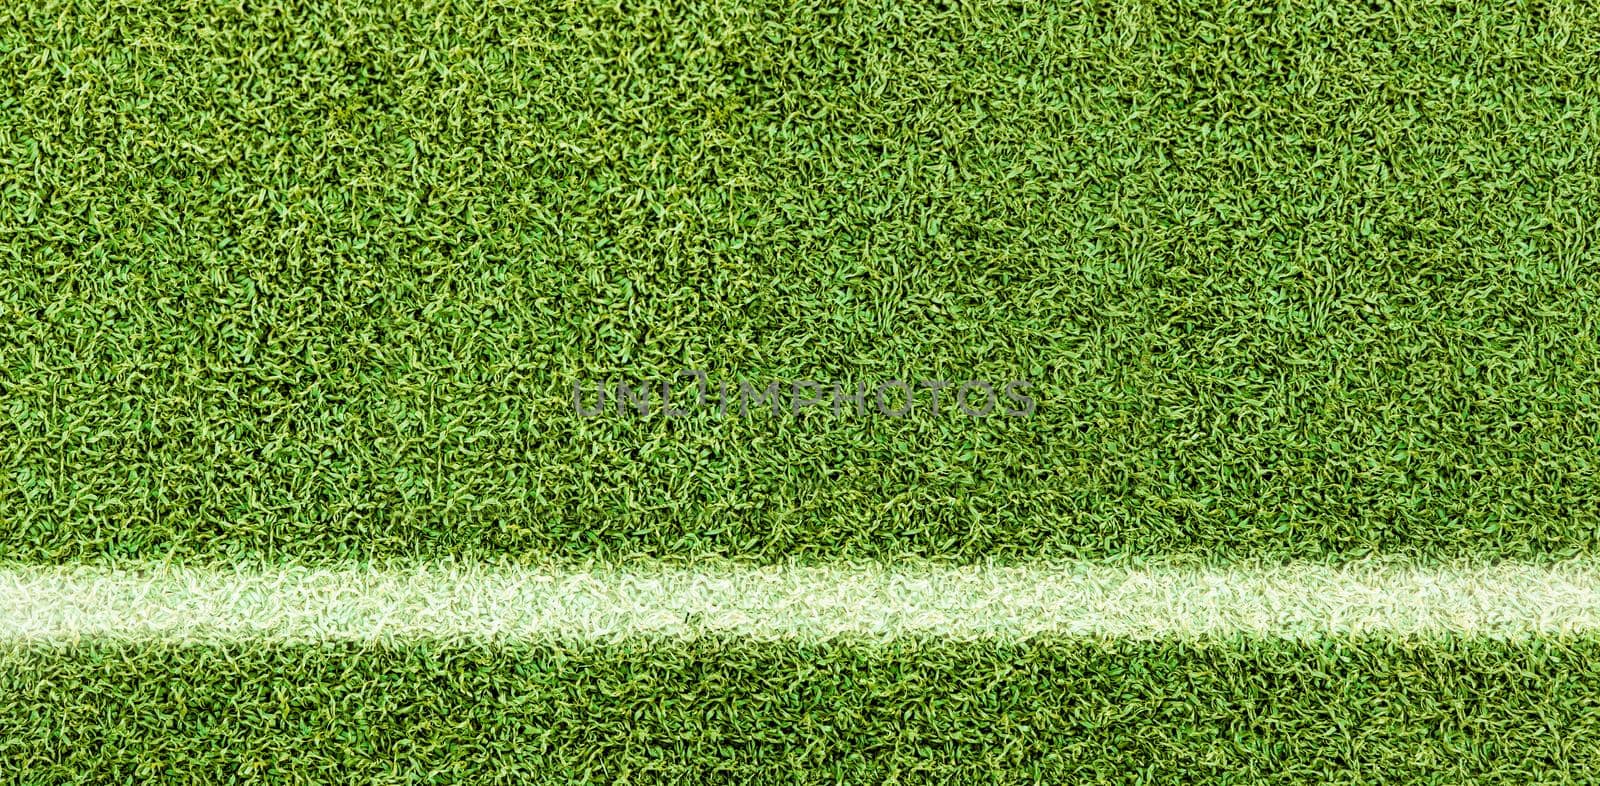 Green grass texture background. Artificial green grass. White Line on the soccer field. Top view of bright grass background. Idea concept used for making green backdrop, lawn for a training football pitch, Grass Golf Courses green lawn pattern textured background.